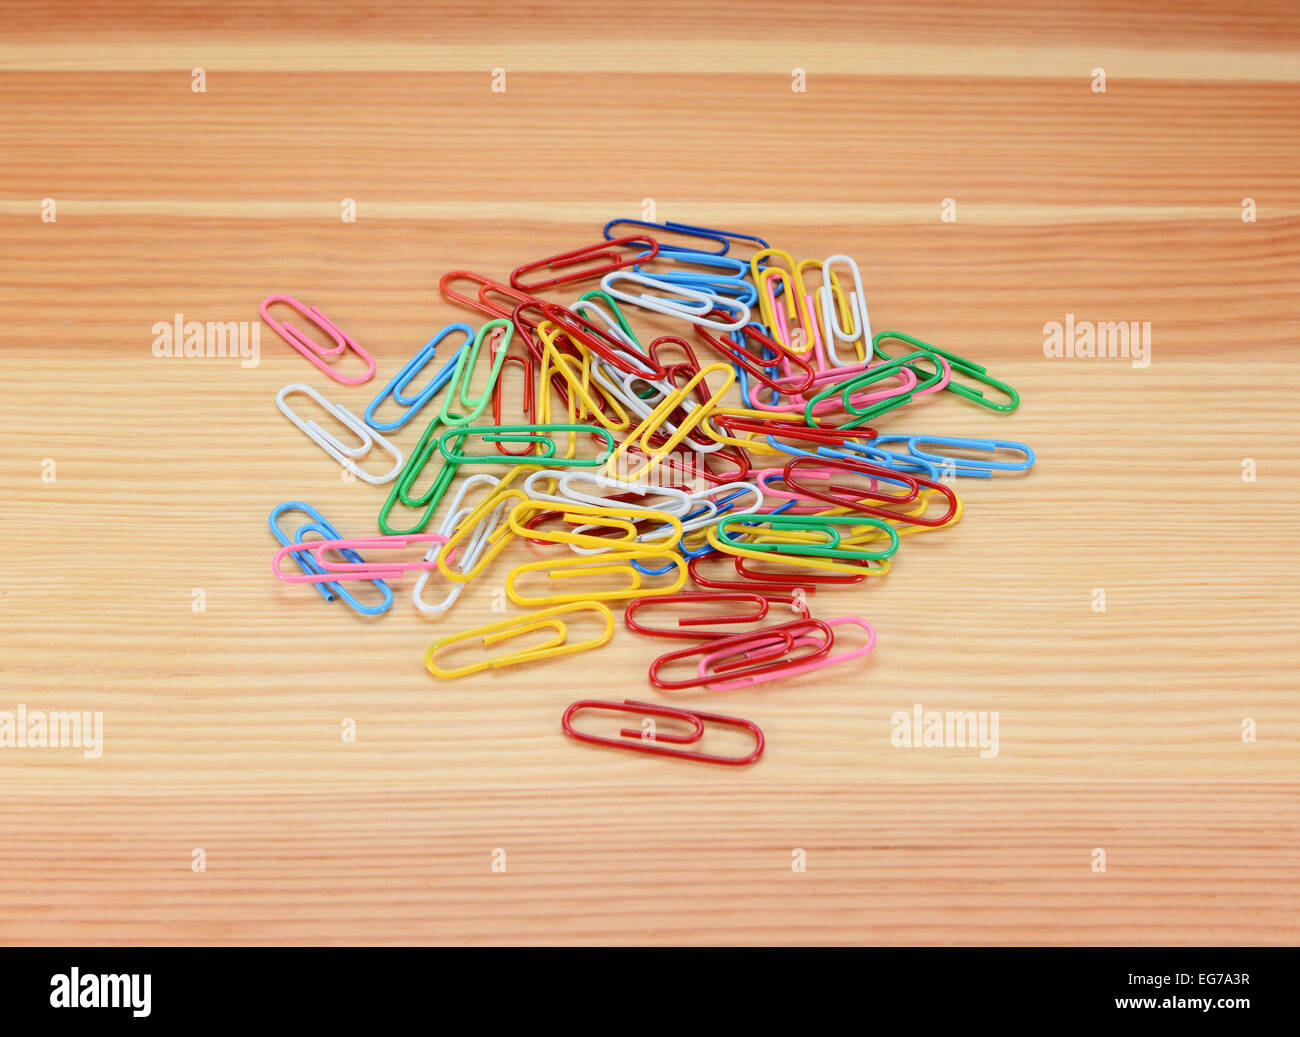 Pile of small coloured paper clips on a wooden background Stock Photo